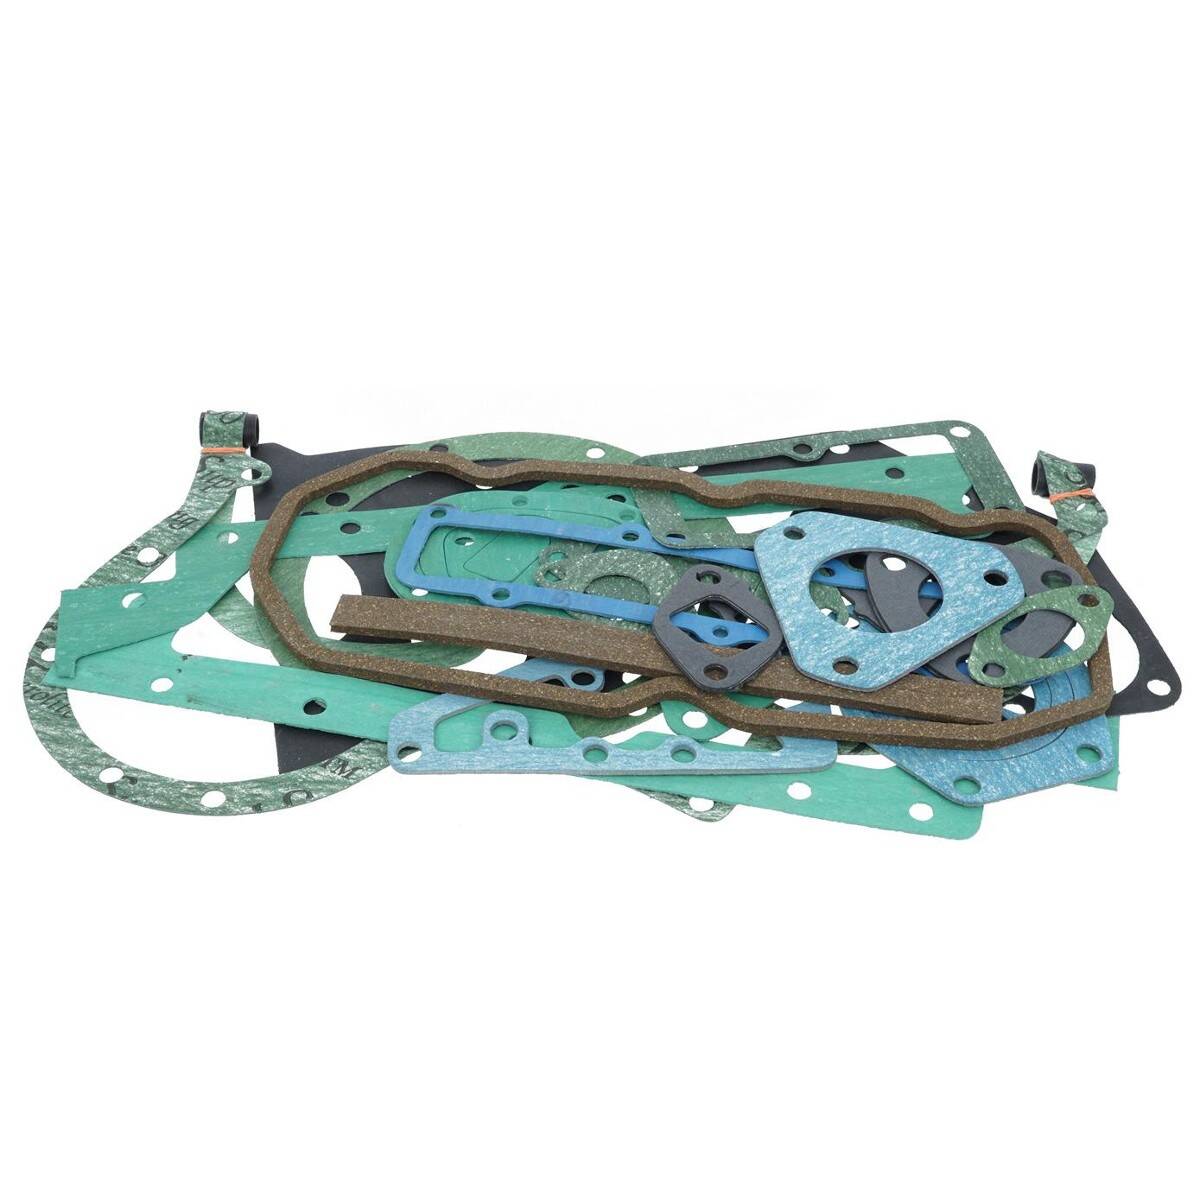 GASKET SET SUITABLE FOR PERKINS A3.152/AT3.152